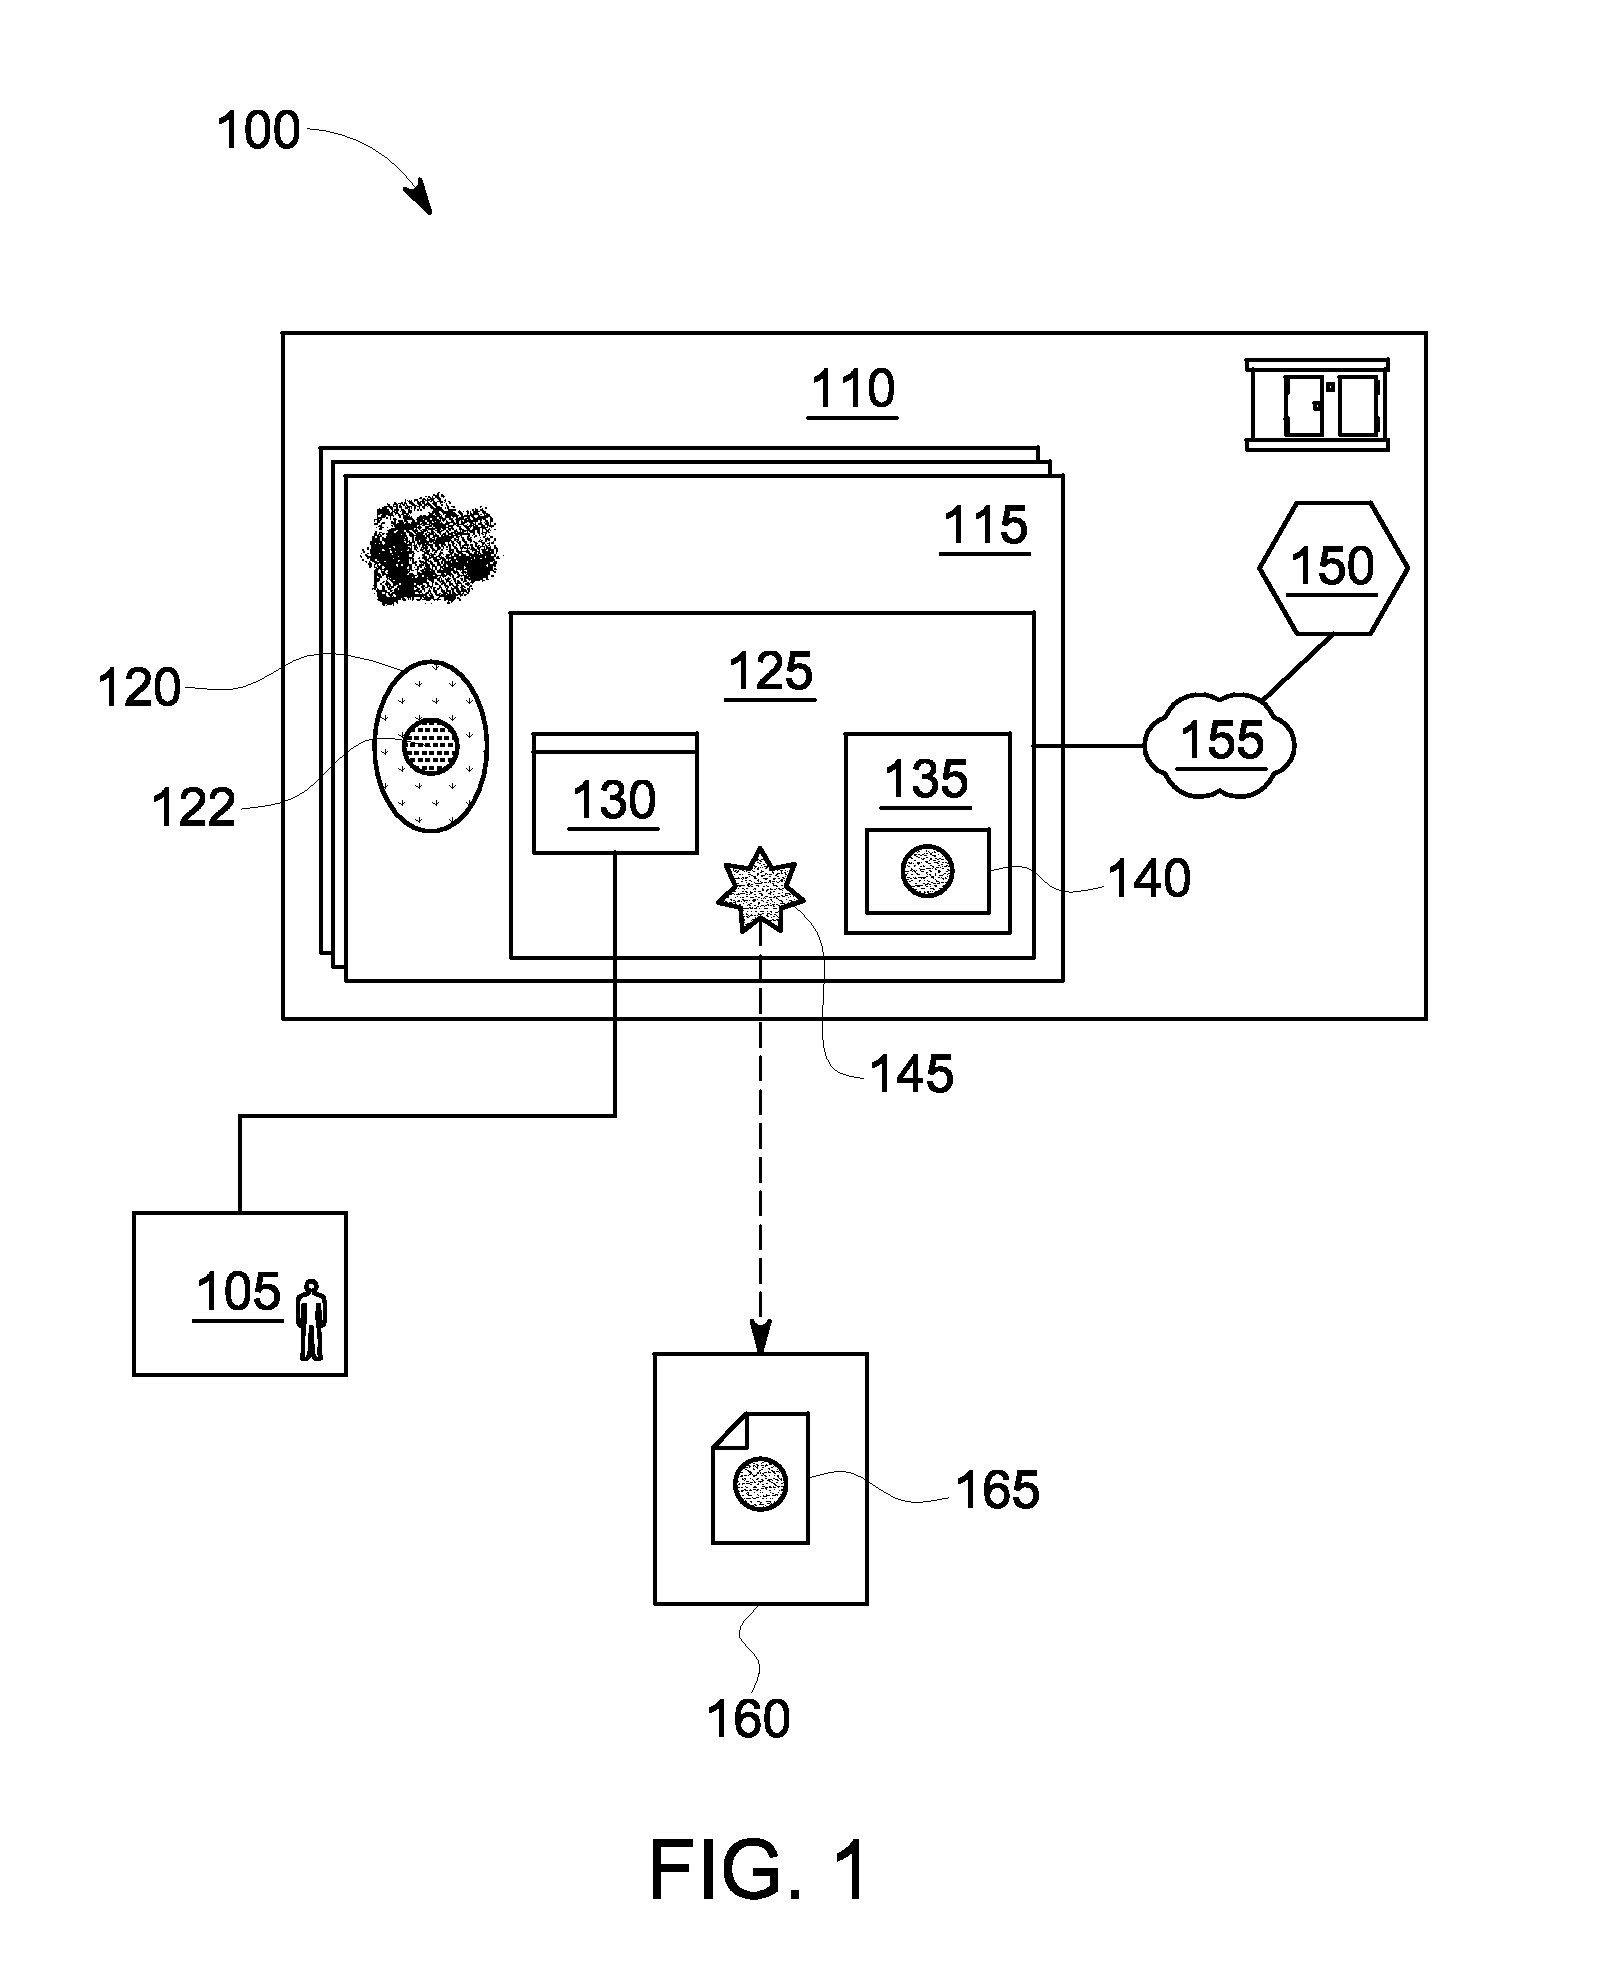 System, method, and computer program for an integrated human-machine interface (HMI) of an engine-generator